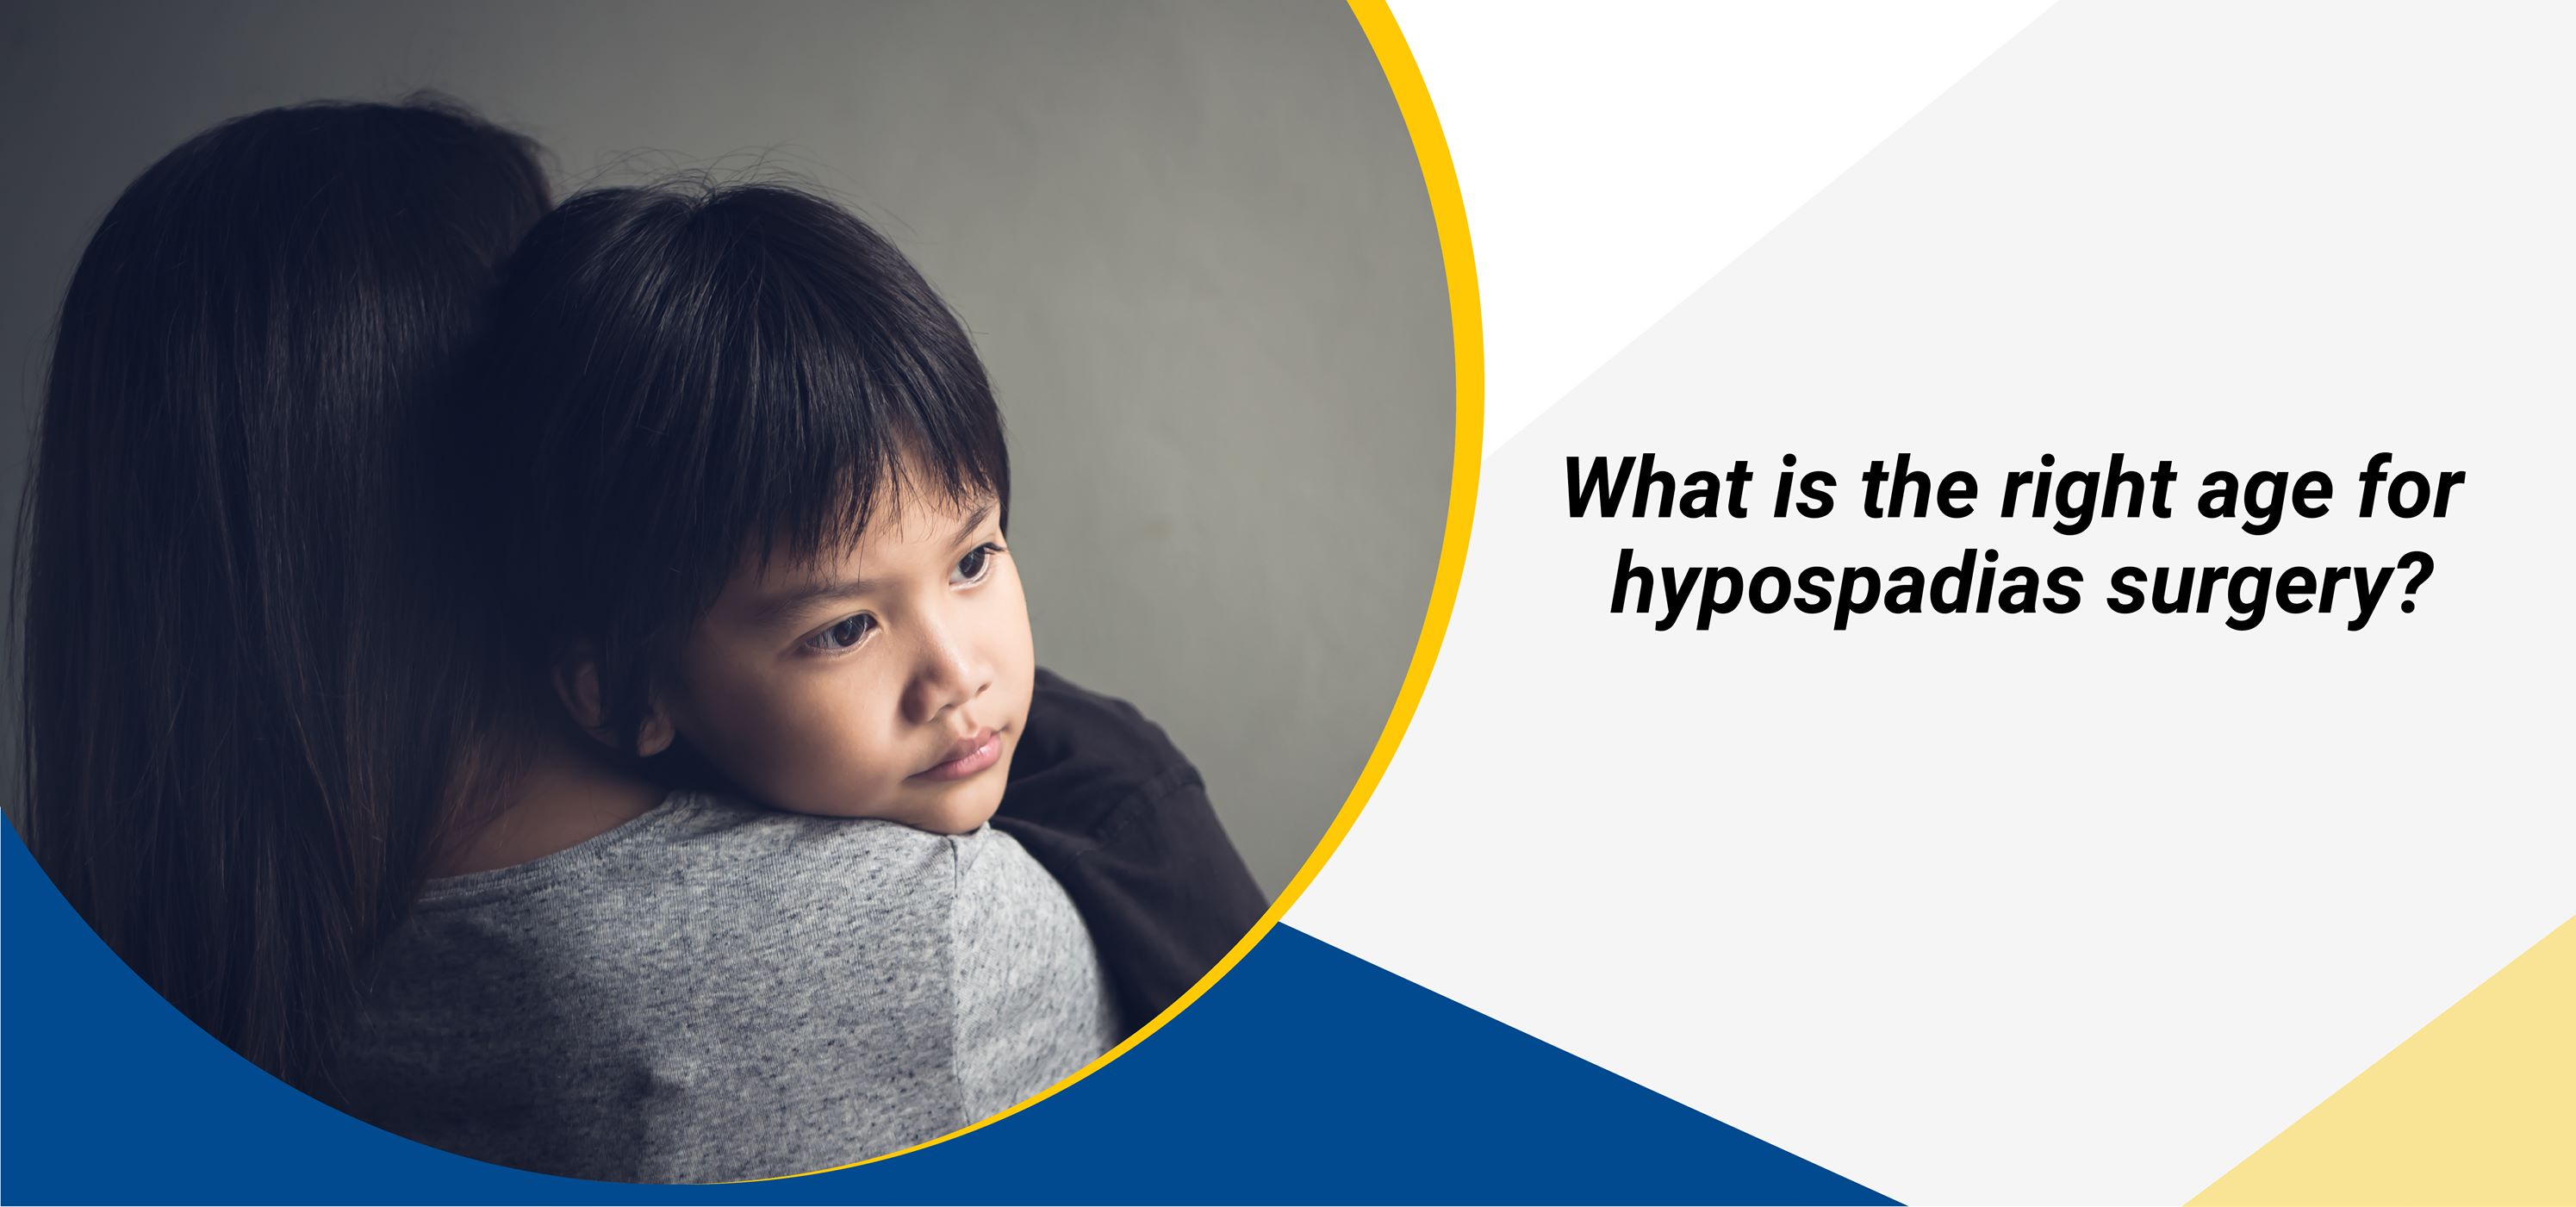 What is the right age for hypospadias surgery